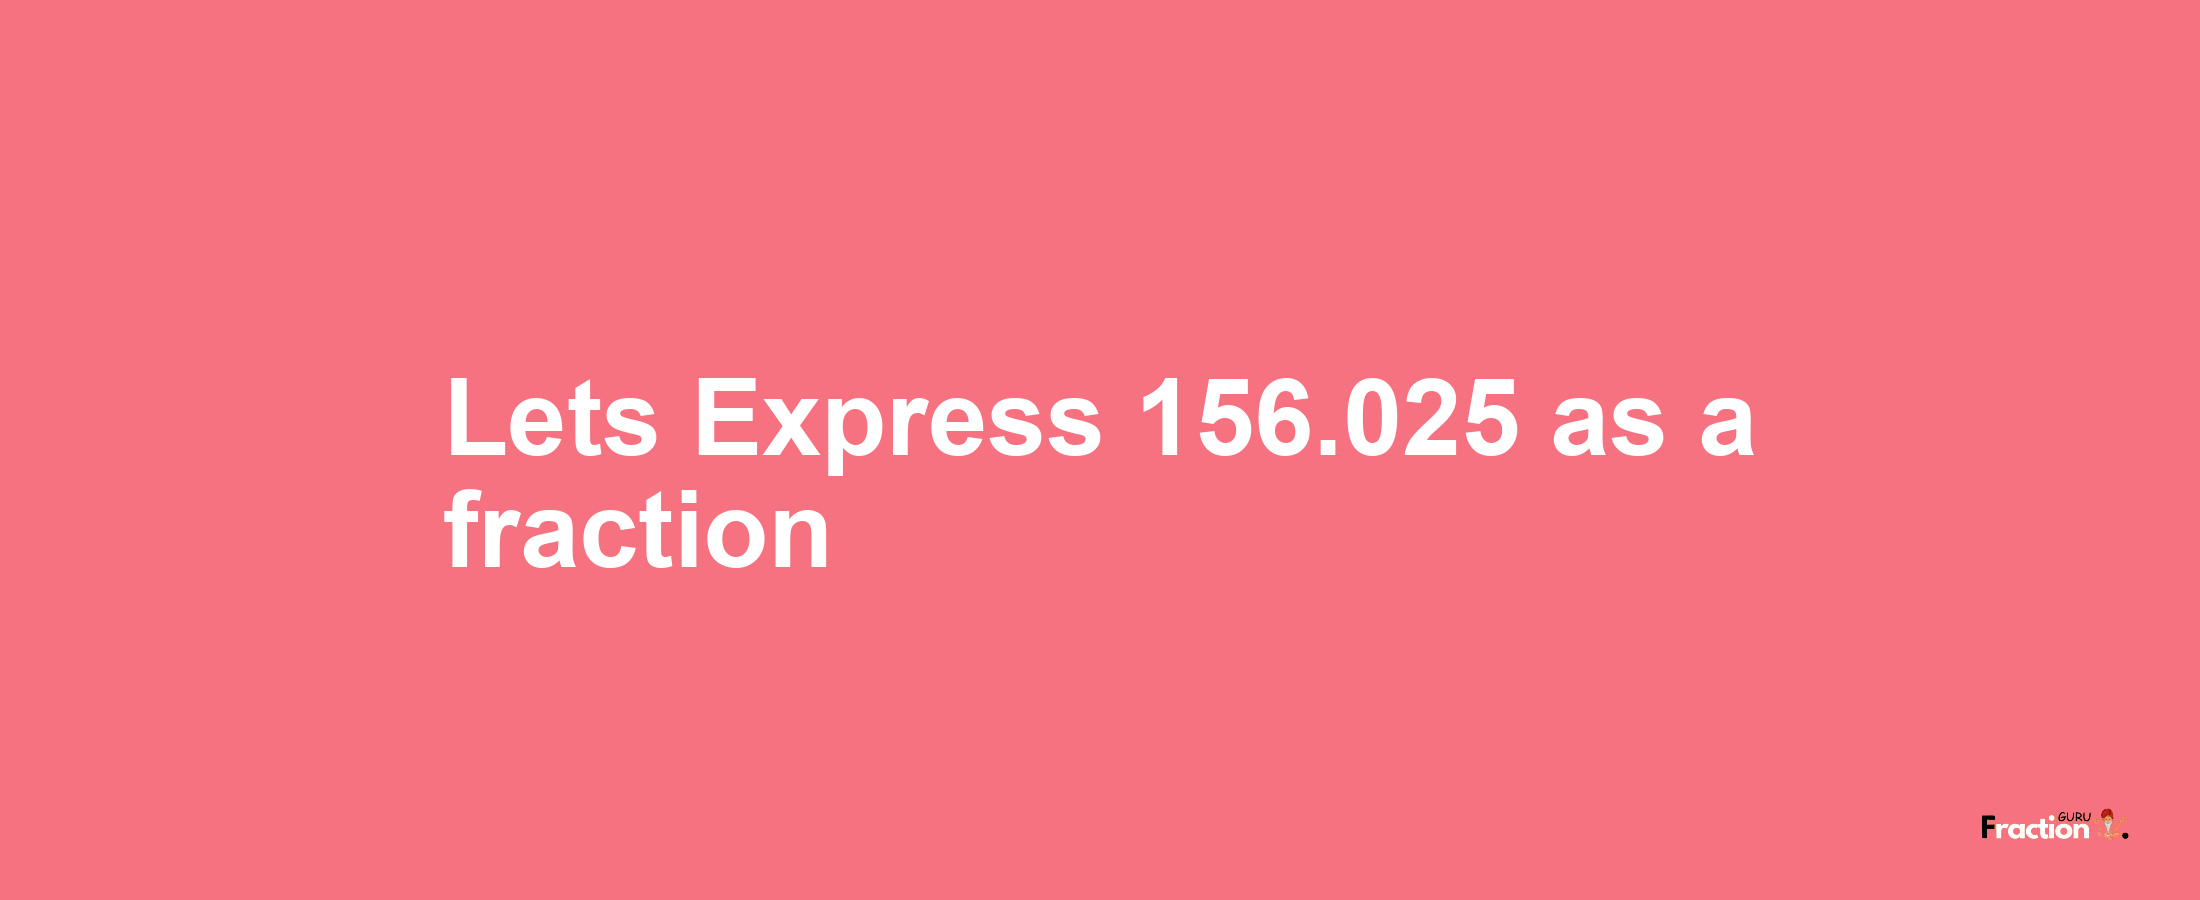 Lets Express 156.025 as afraction